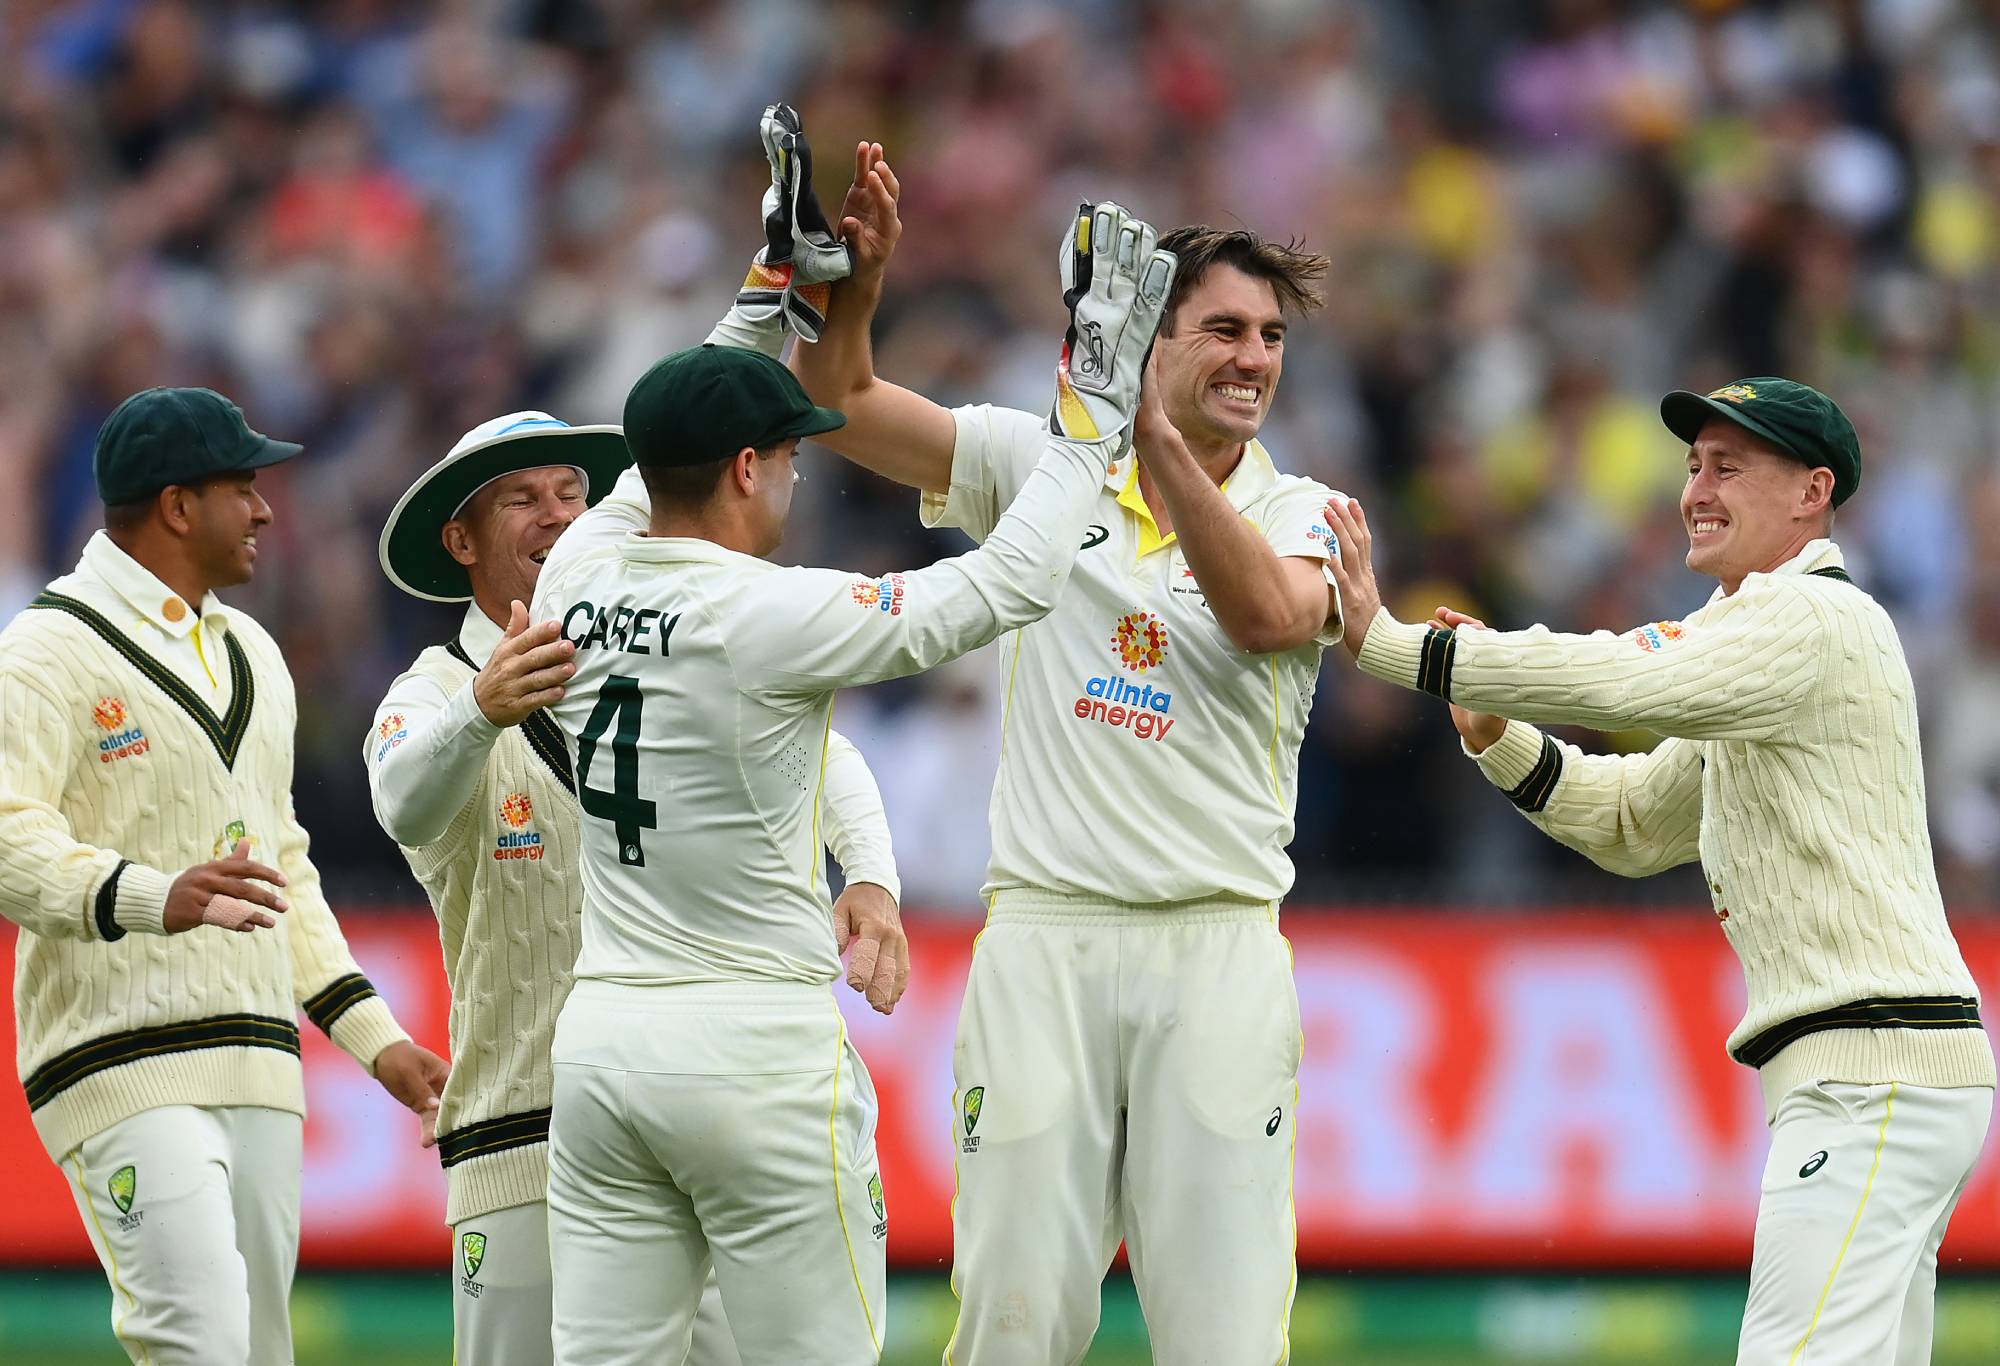 MELBOURNE, AUSTRALIA - DECEMBER 28: Pat Cummins of Australia celebrates dismissing Dean Elgar of South Africa  during day three of the Second Test match in the series between Australia and South Africa at Melbourne Cricket Ground on December 28, 2022 in Melbourne, Australia. (Photo by Quinn Rooney/Getty Images)